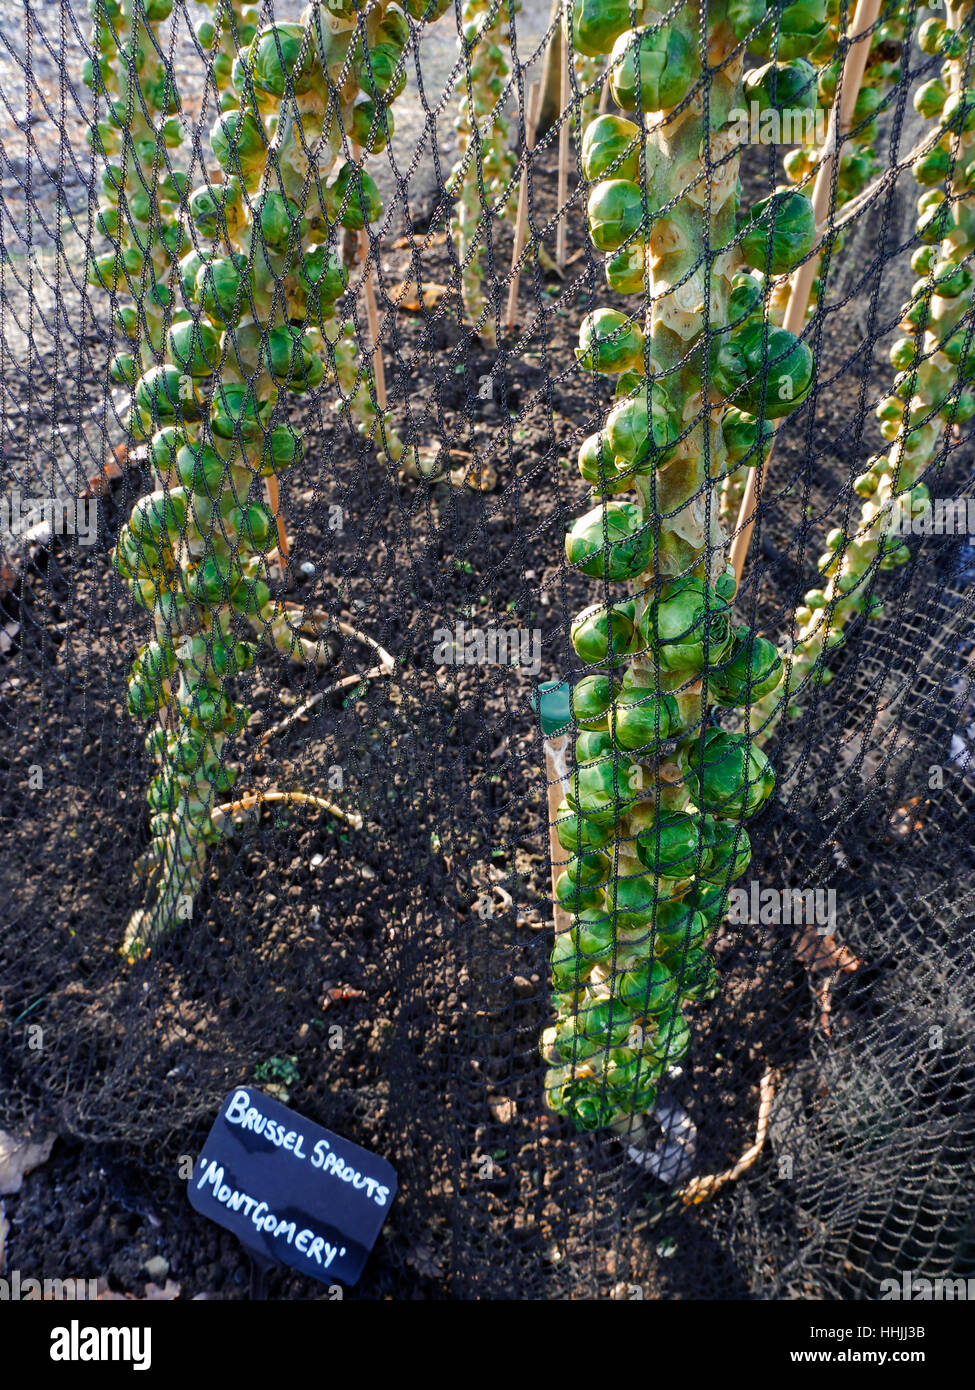 Enviro netting protecting winter brussel sprouts 'Montgomery' growing behind butterfly protective netting Stock Photo